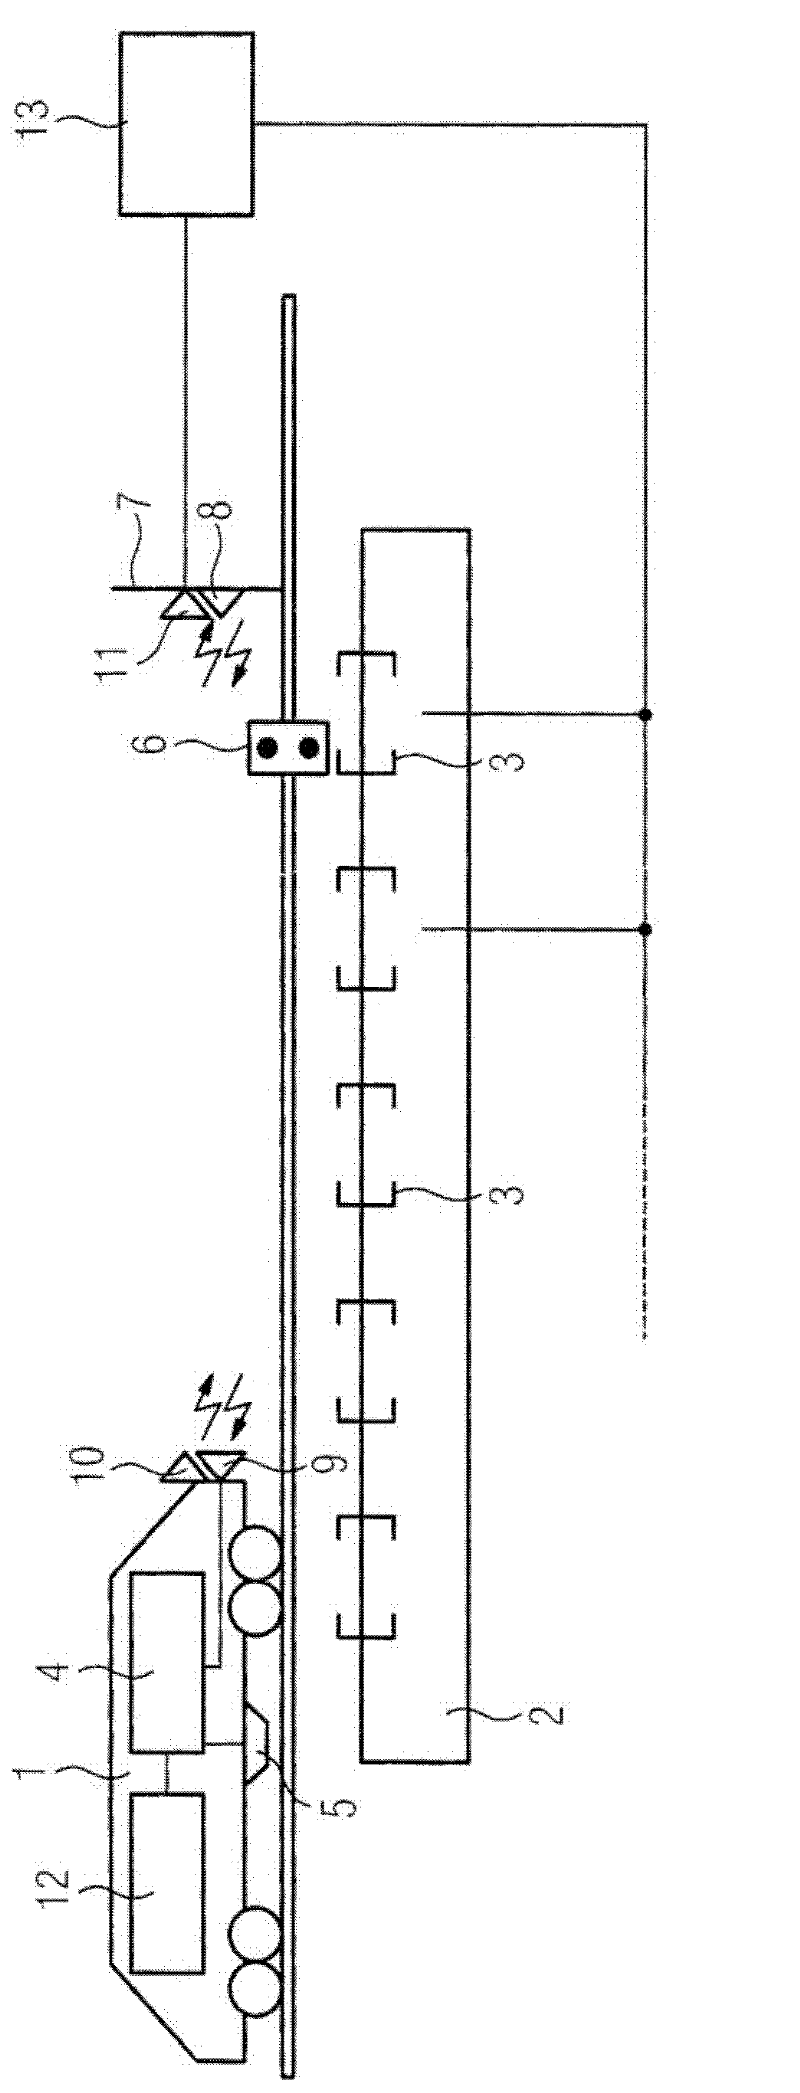 Method and device for increasing the stopping accuracy of a moving object